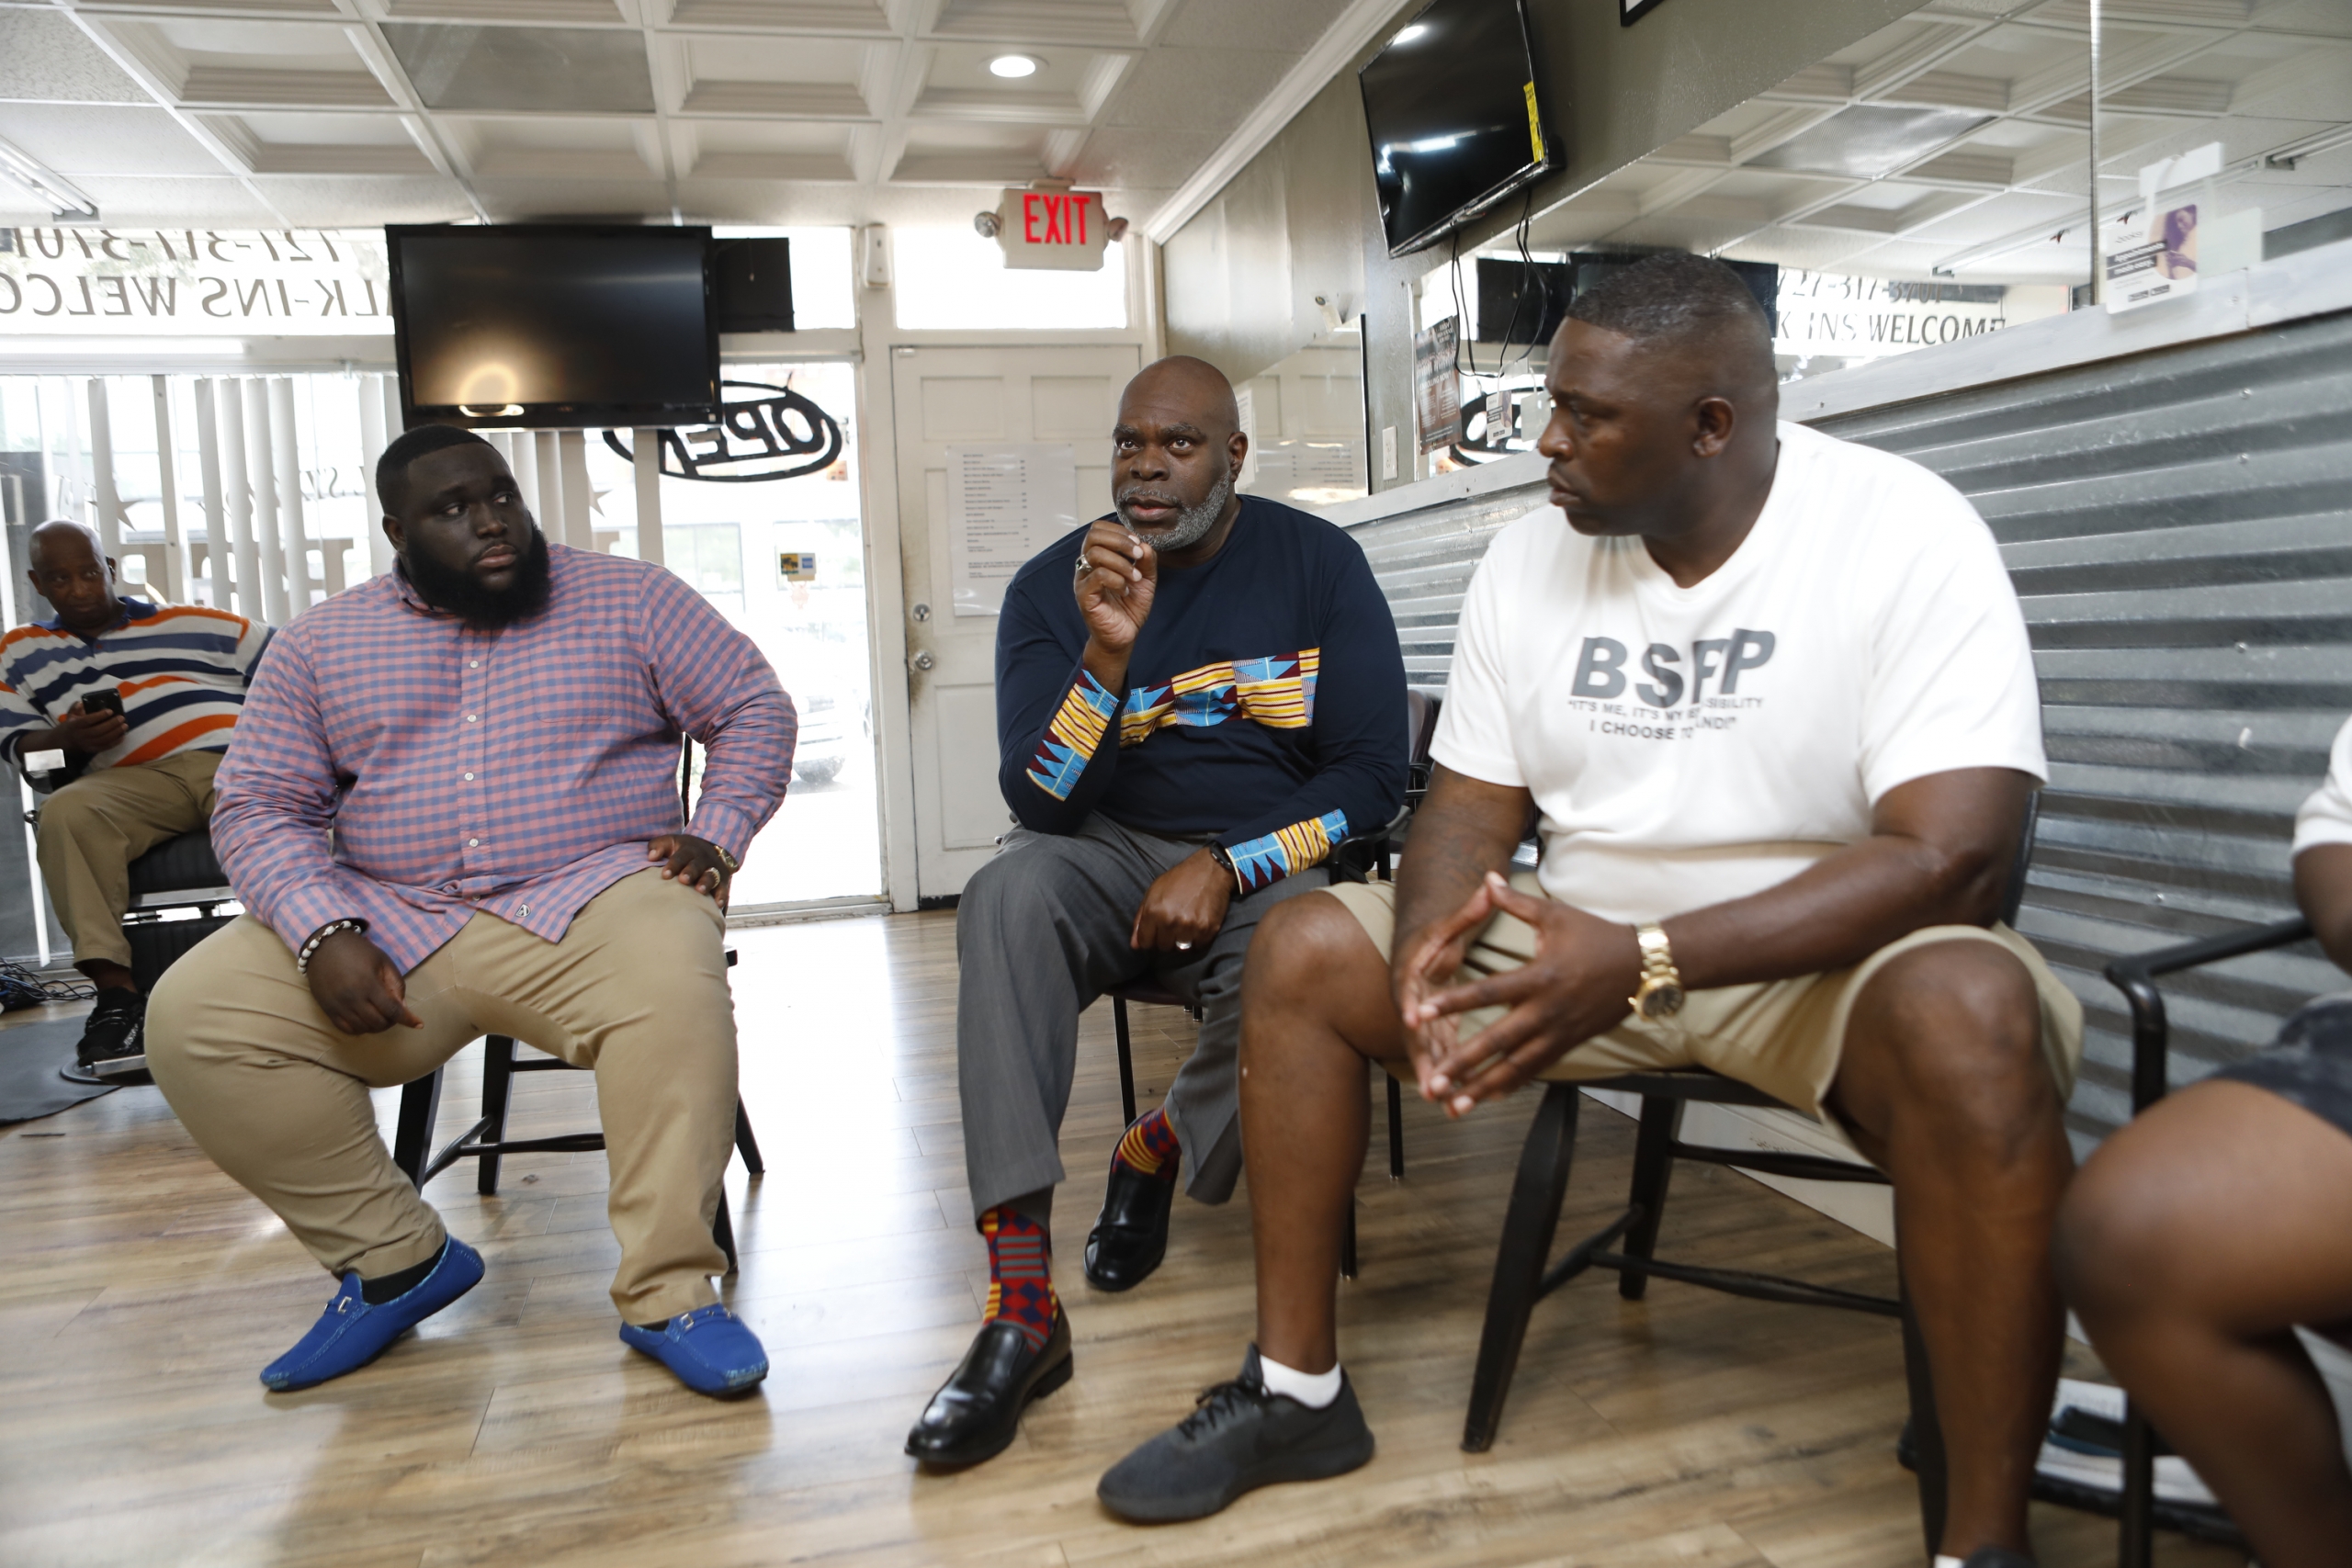 Thinking 'beyond the hospital' for Black men recovering from